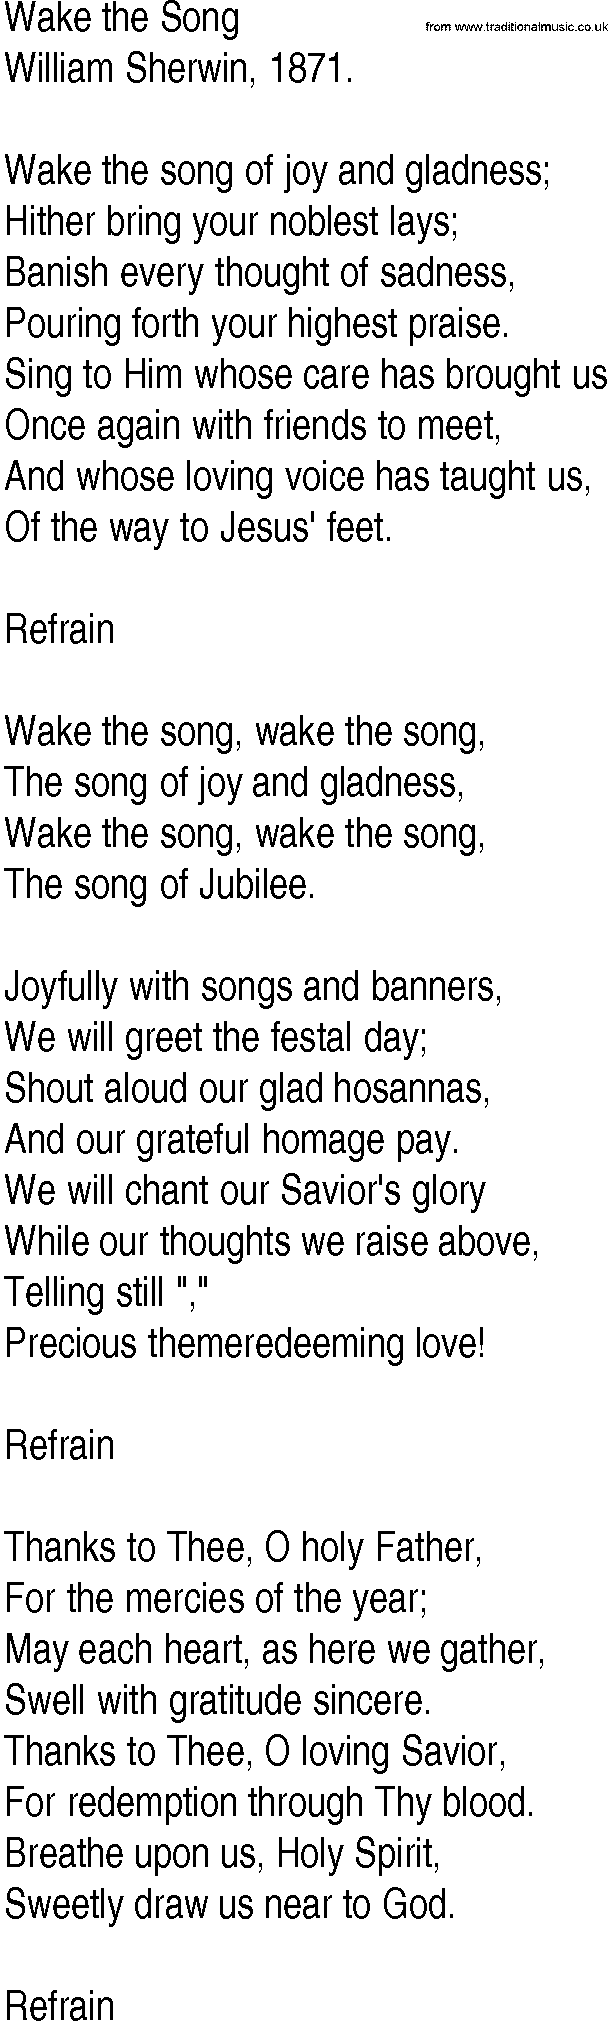 Hymn and Gospel Song: Wake the Song by William Sherwin lyrics